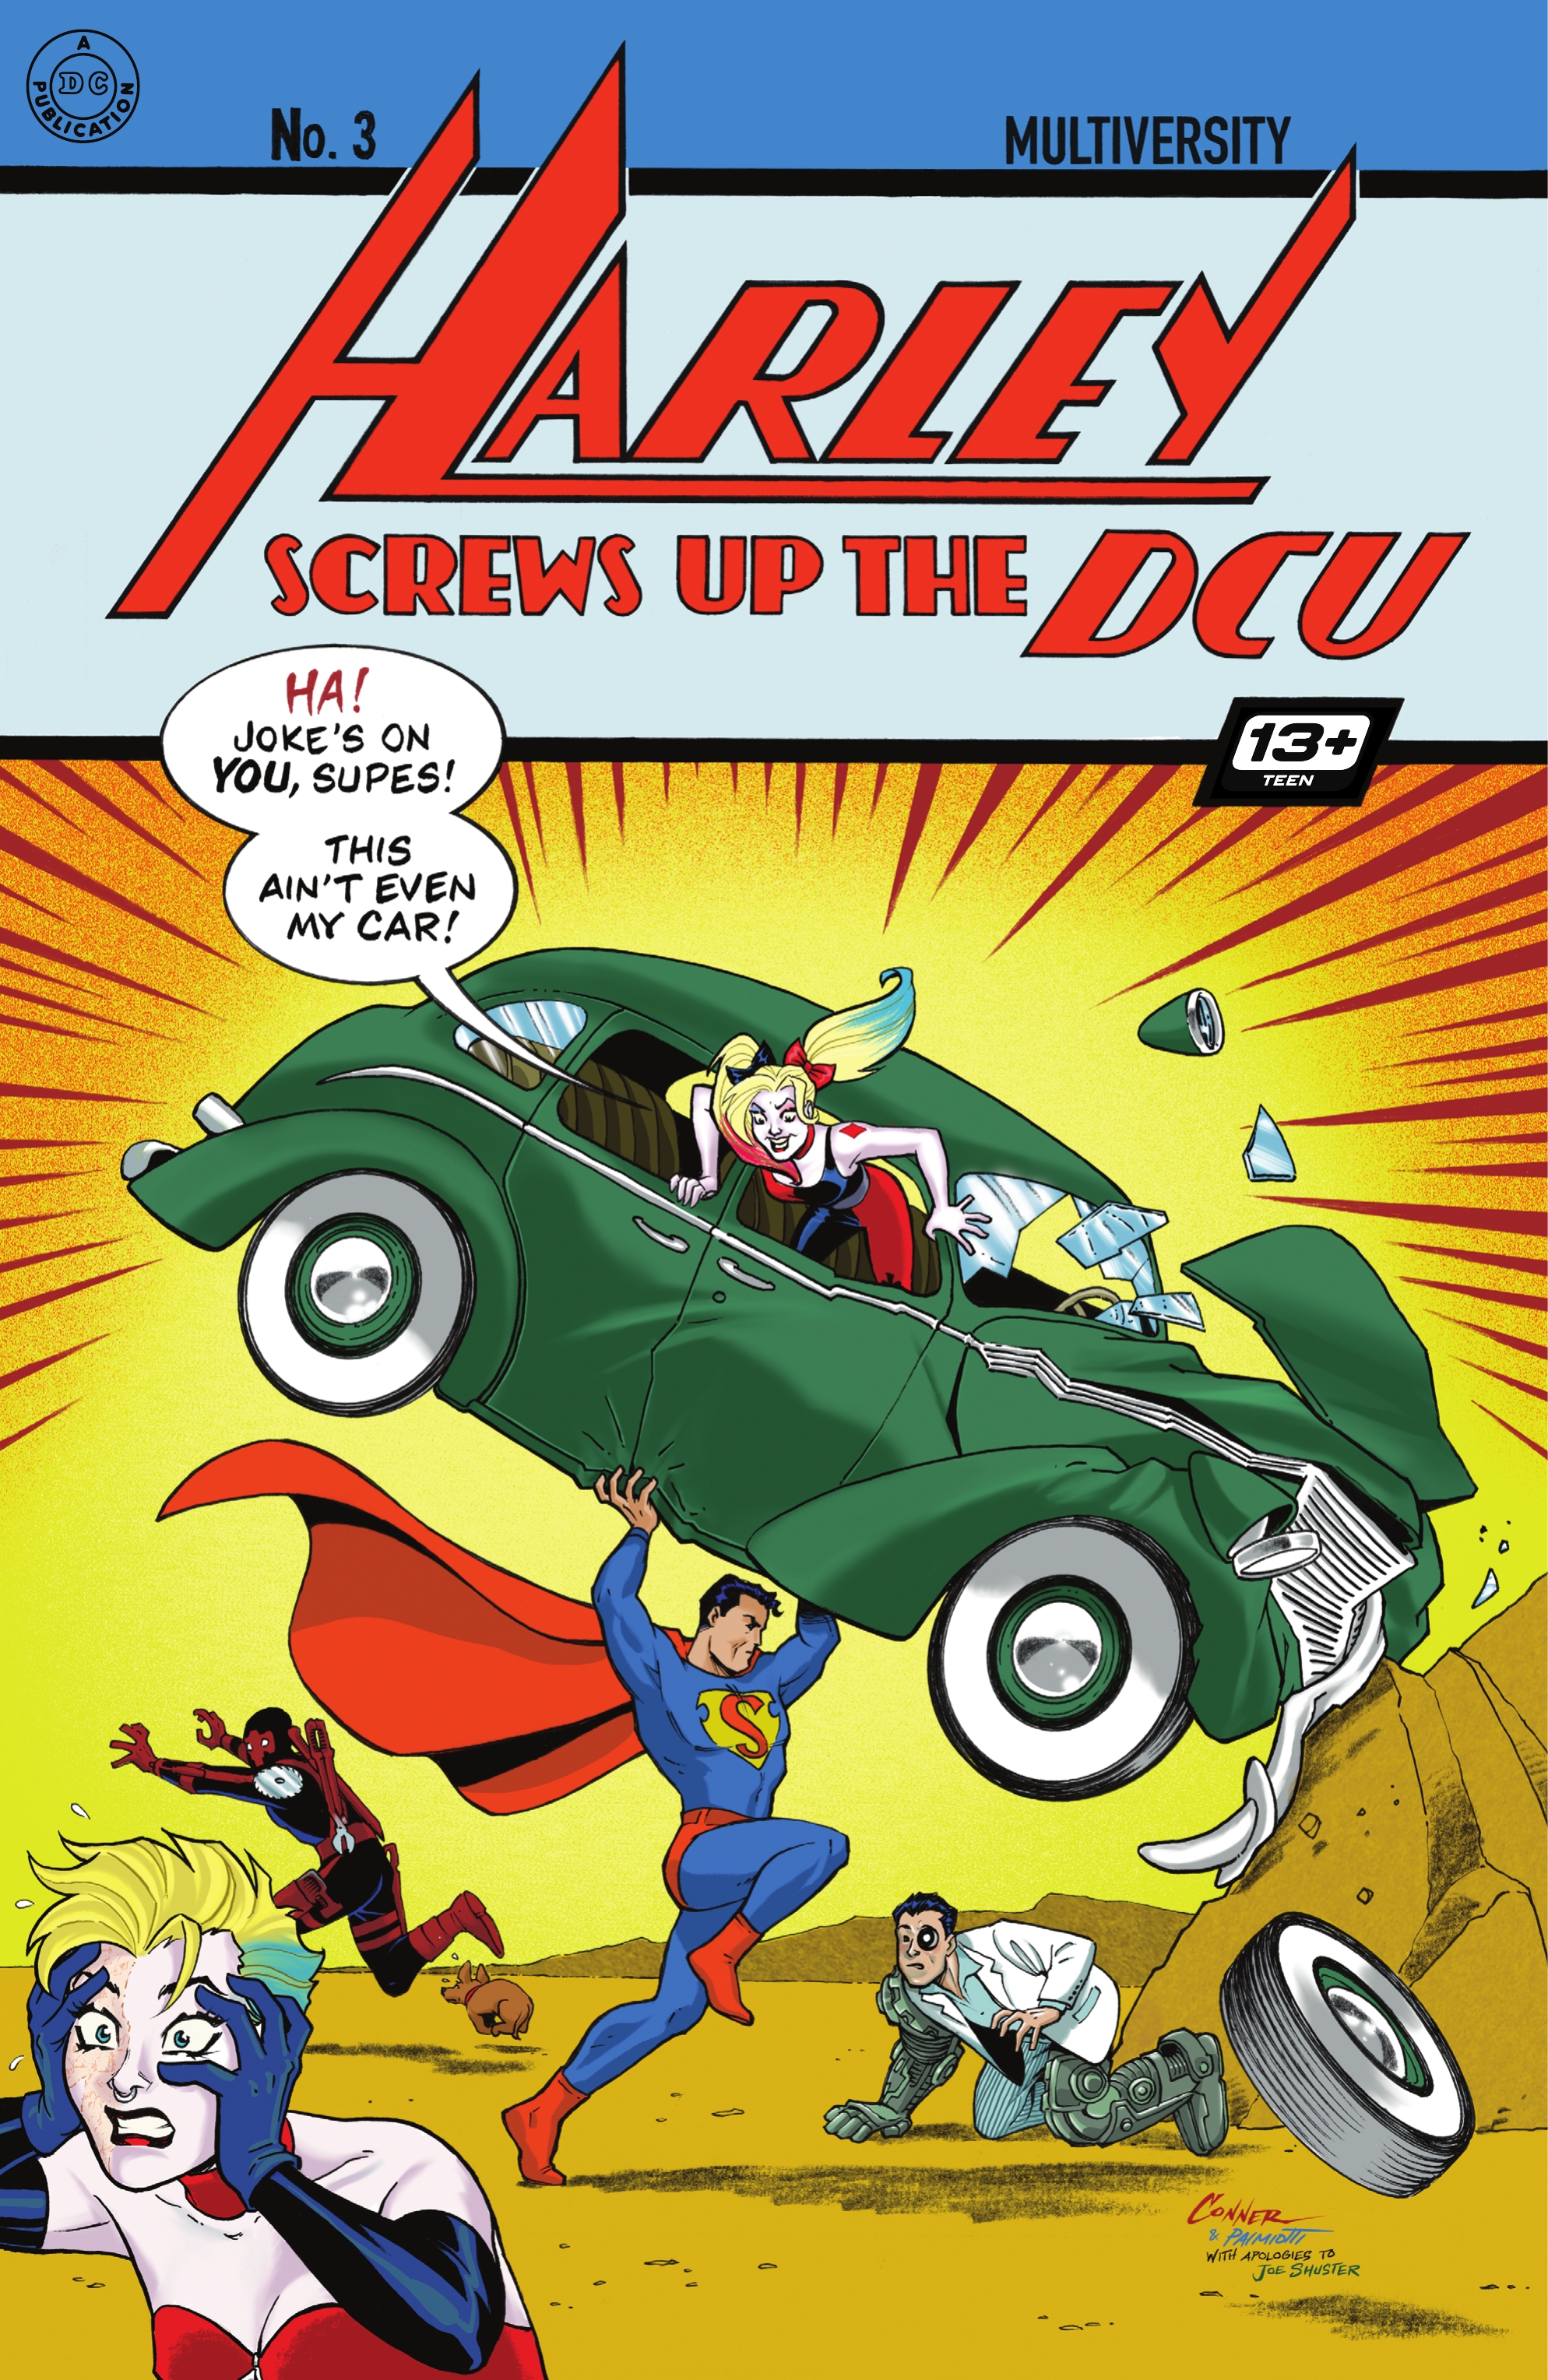 Read online Multiversity: Harley Screws Up The DCU comic -  Issue #3 - 1